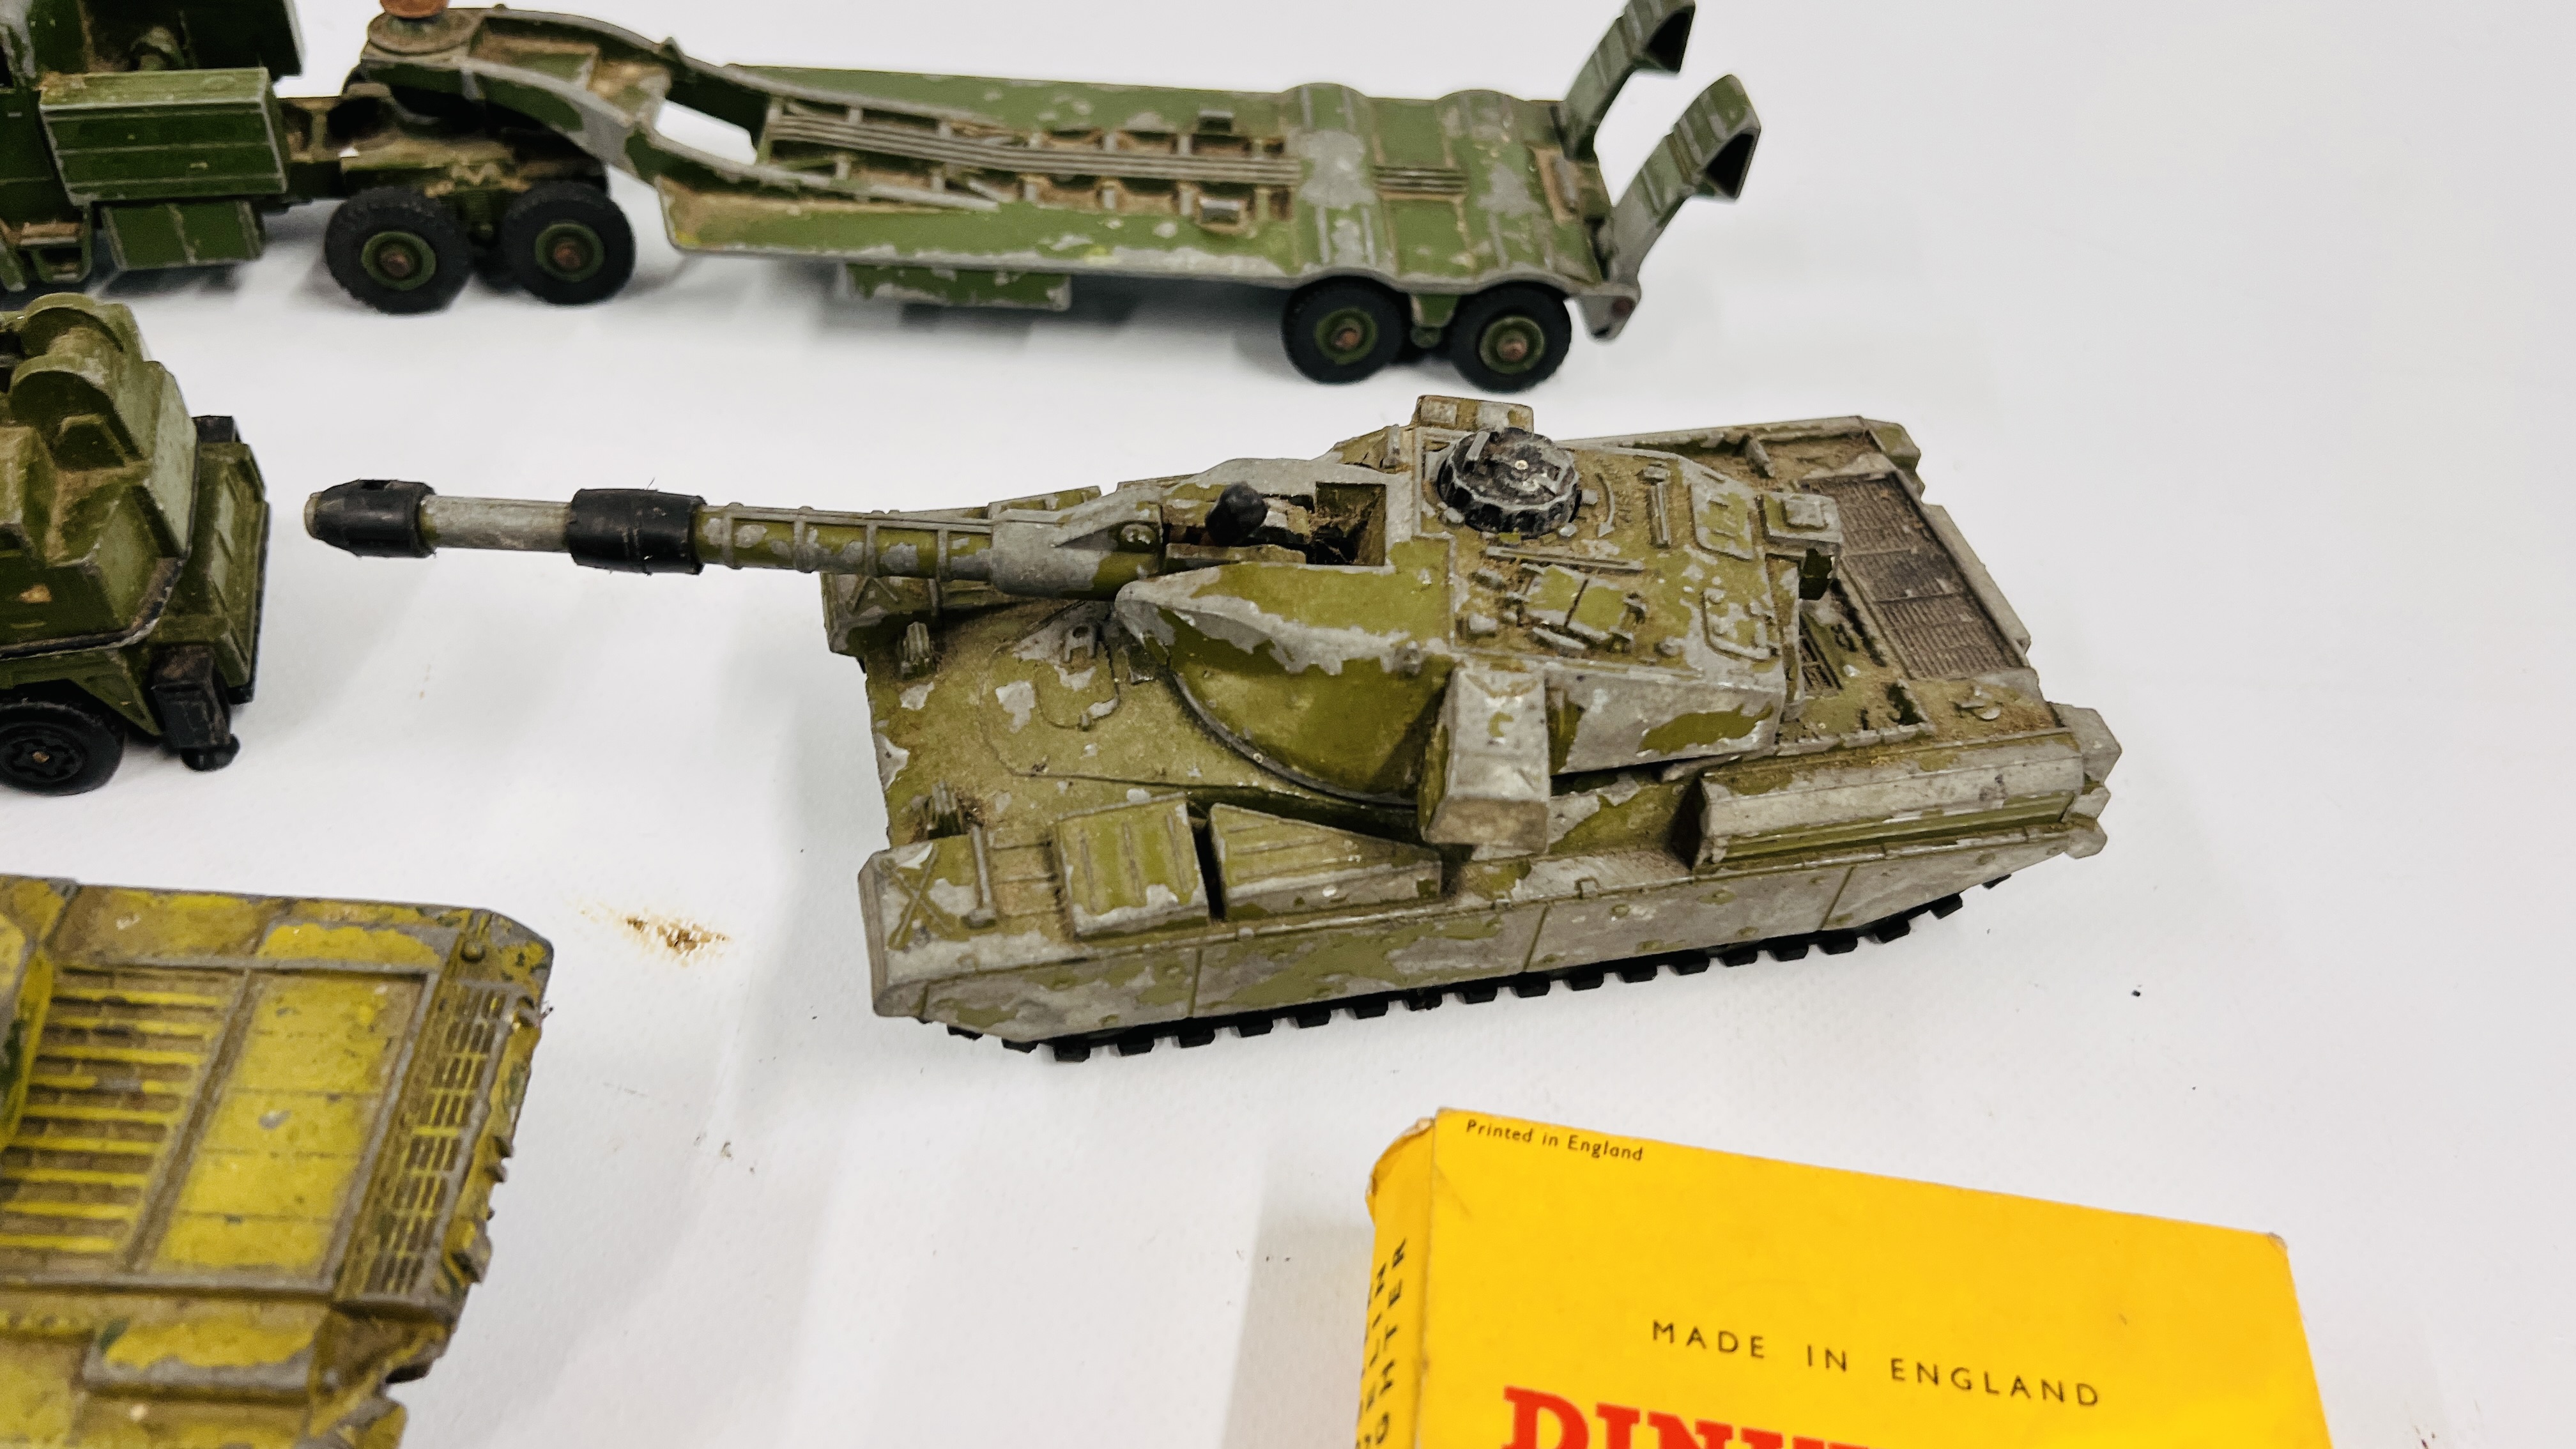 A GROUP OF VINTAGE DINKY DIE-CAST MILITARY VEHICLES TO INCLUDE A CHEFTAIN TANK, CENTURION TANK, - Image 11 of 14